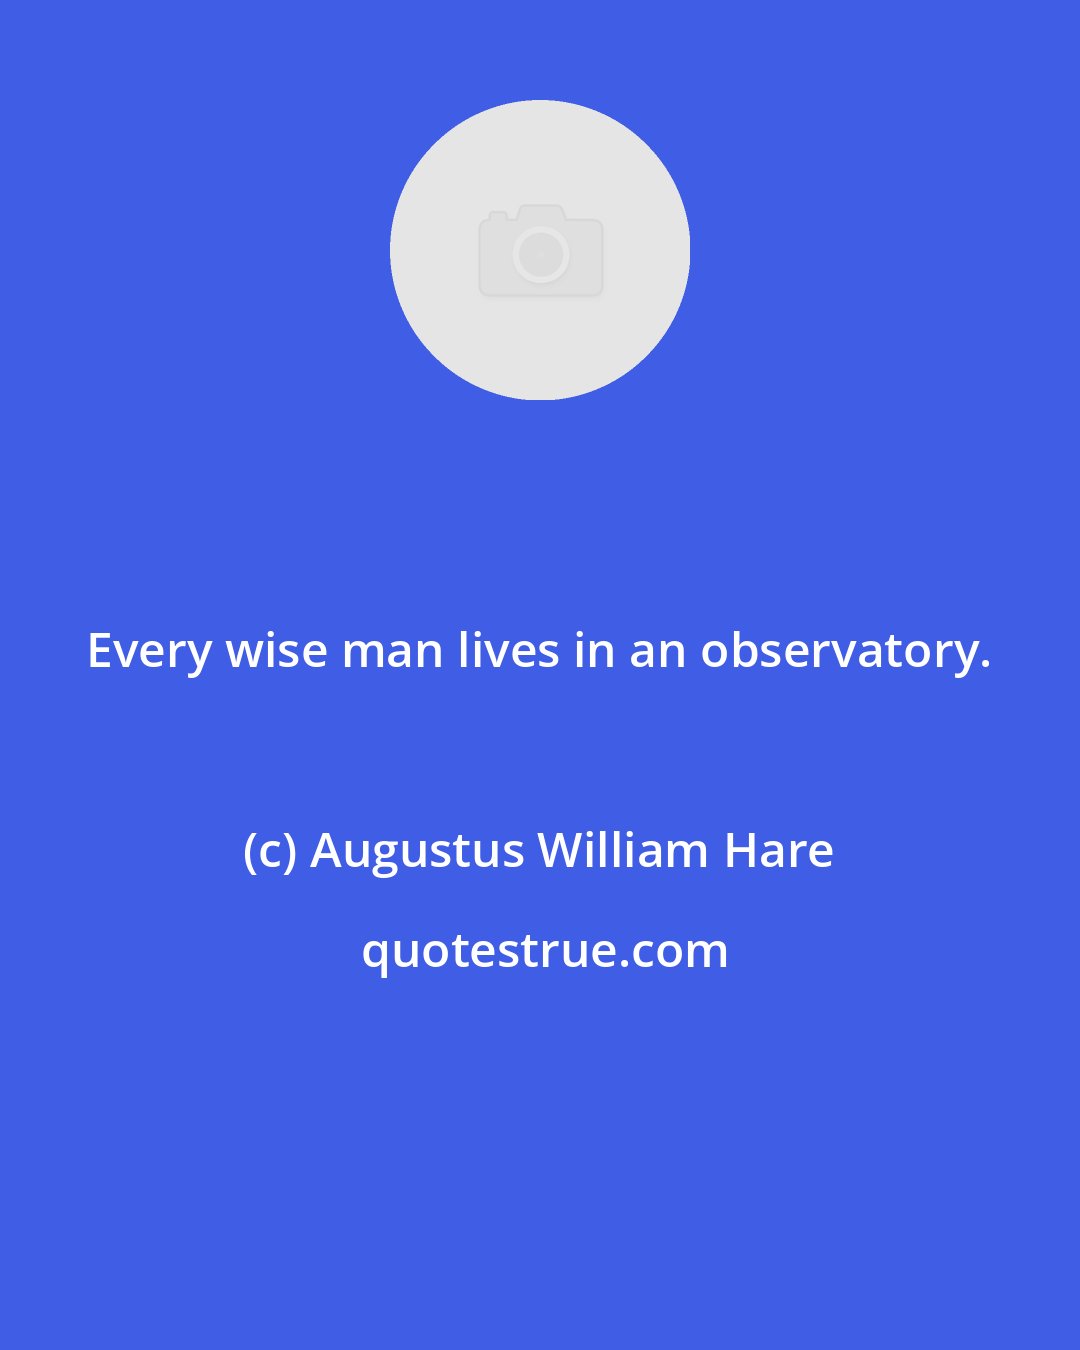 Augustus William Hare: Every wise man lives in an observatory.